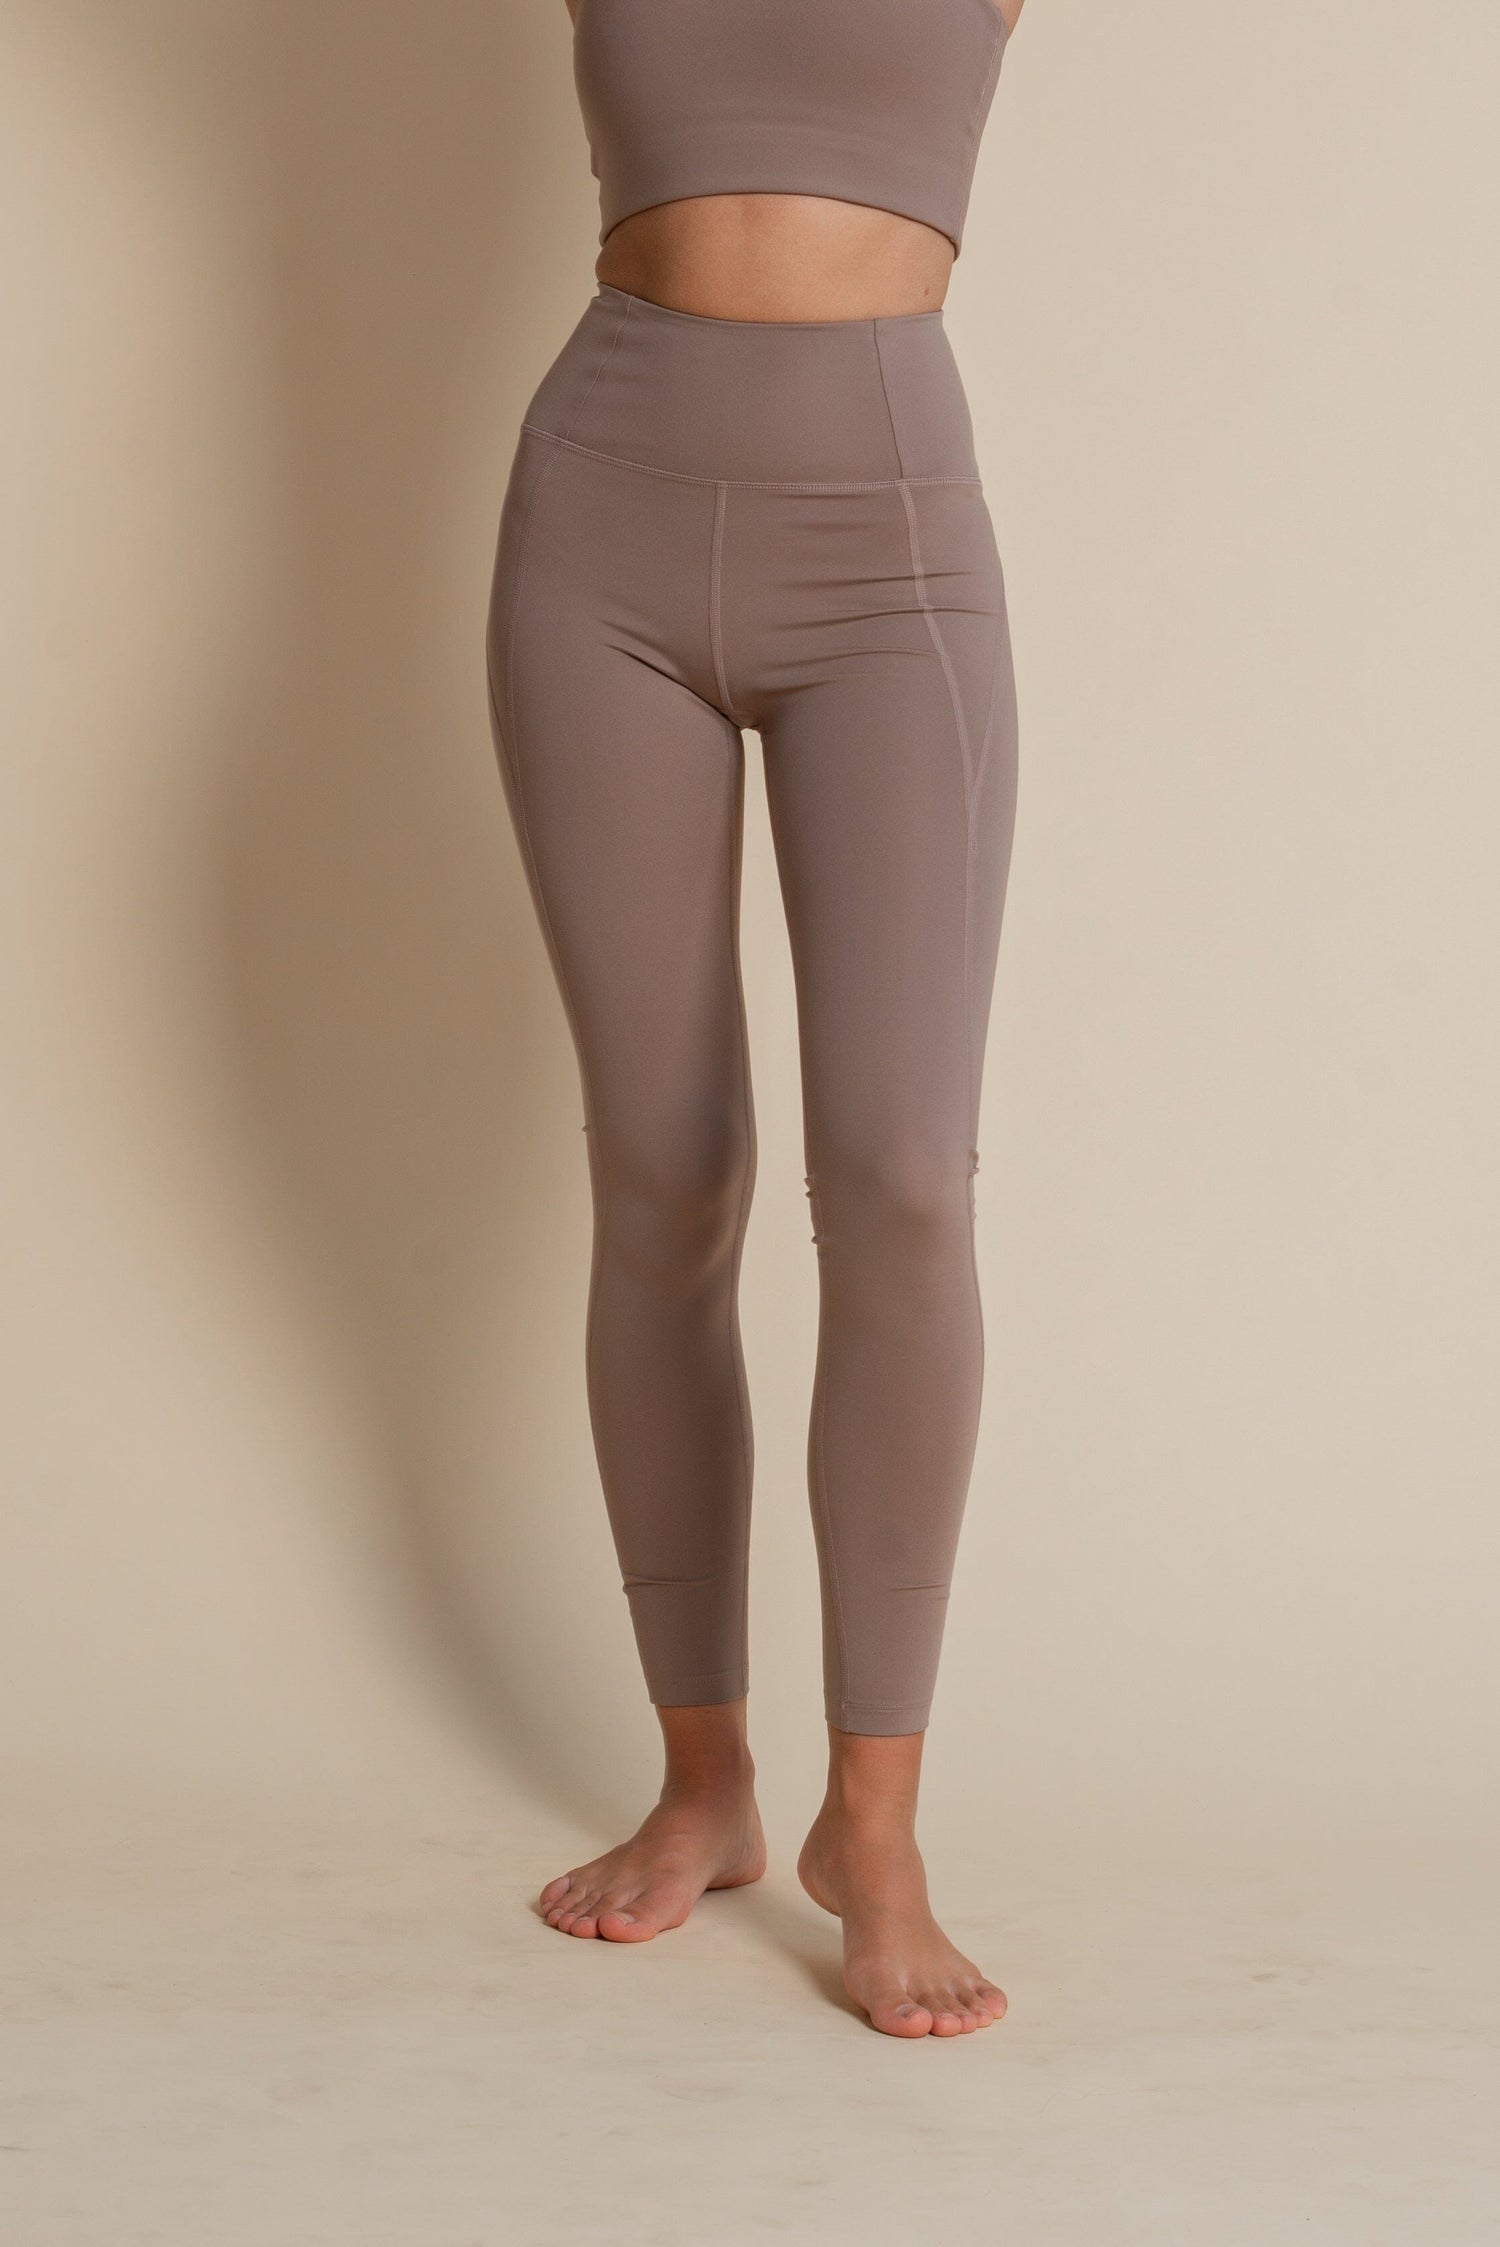 Girlfriend Collective W's Compressive Legging - Limited Colors - Made From Recycled Plastic Bottles Limestone Normal Pants